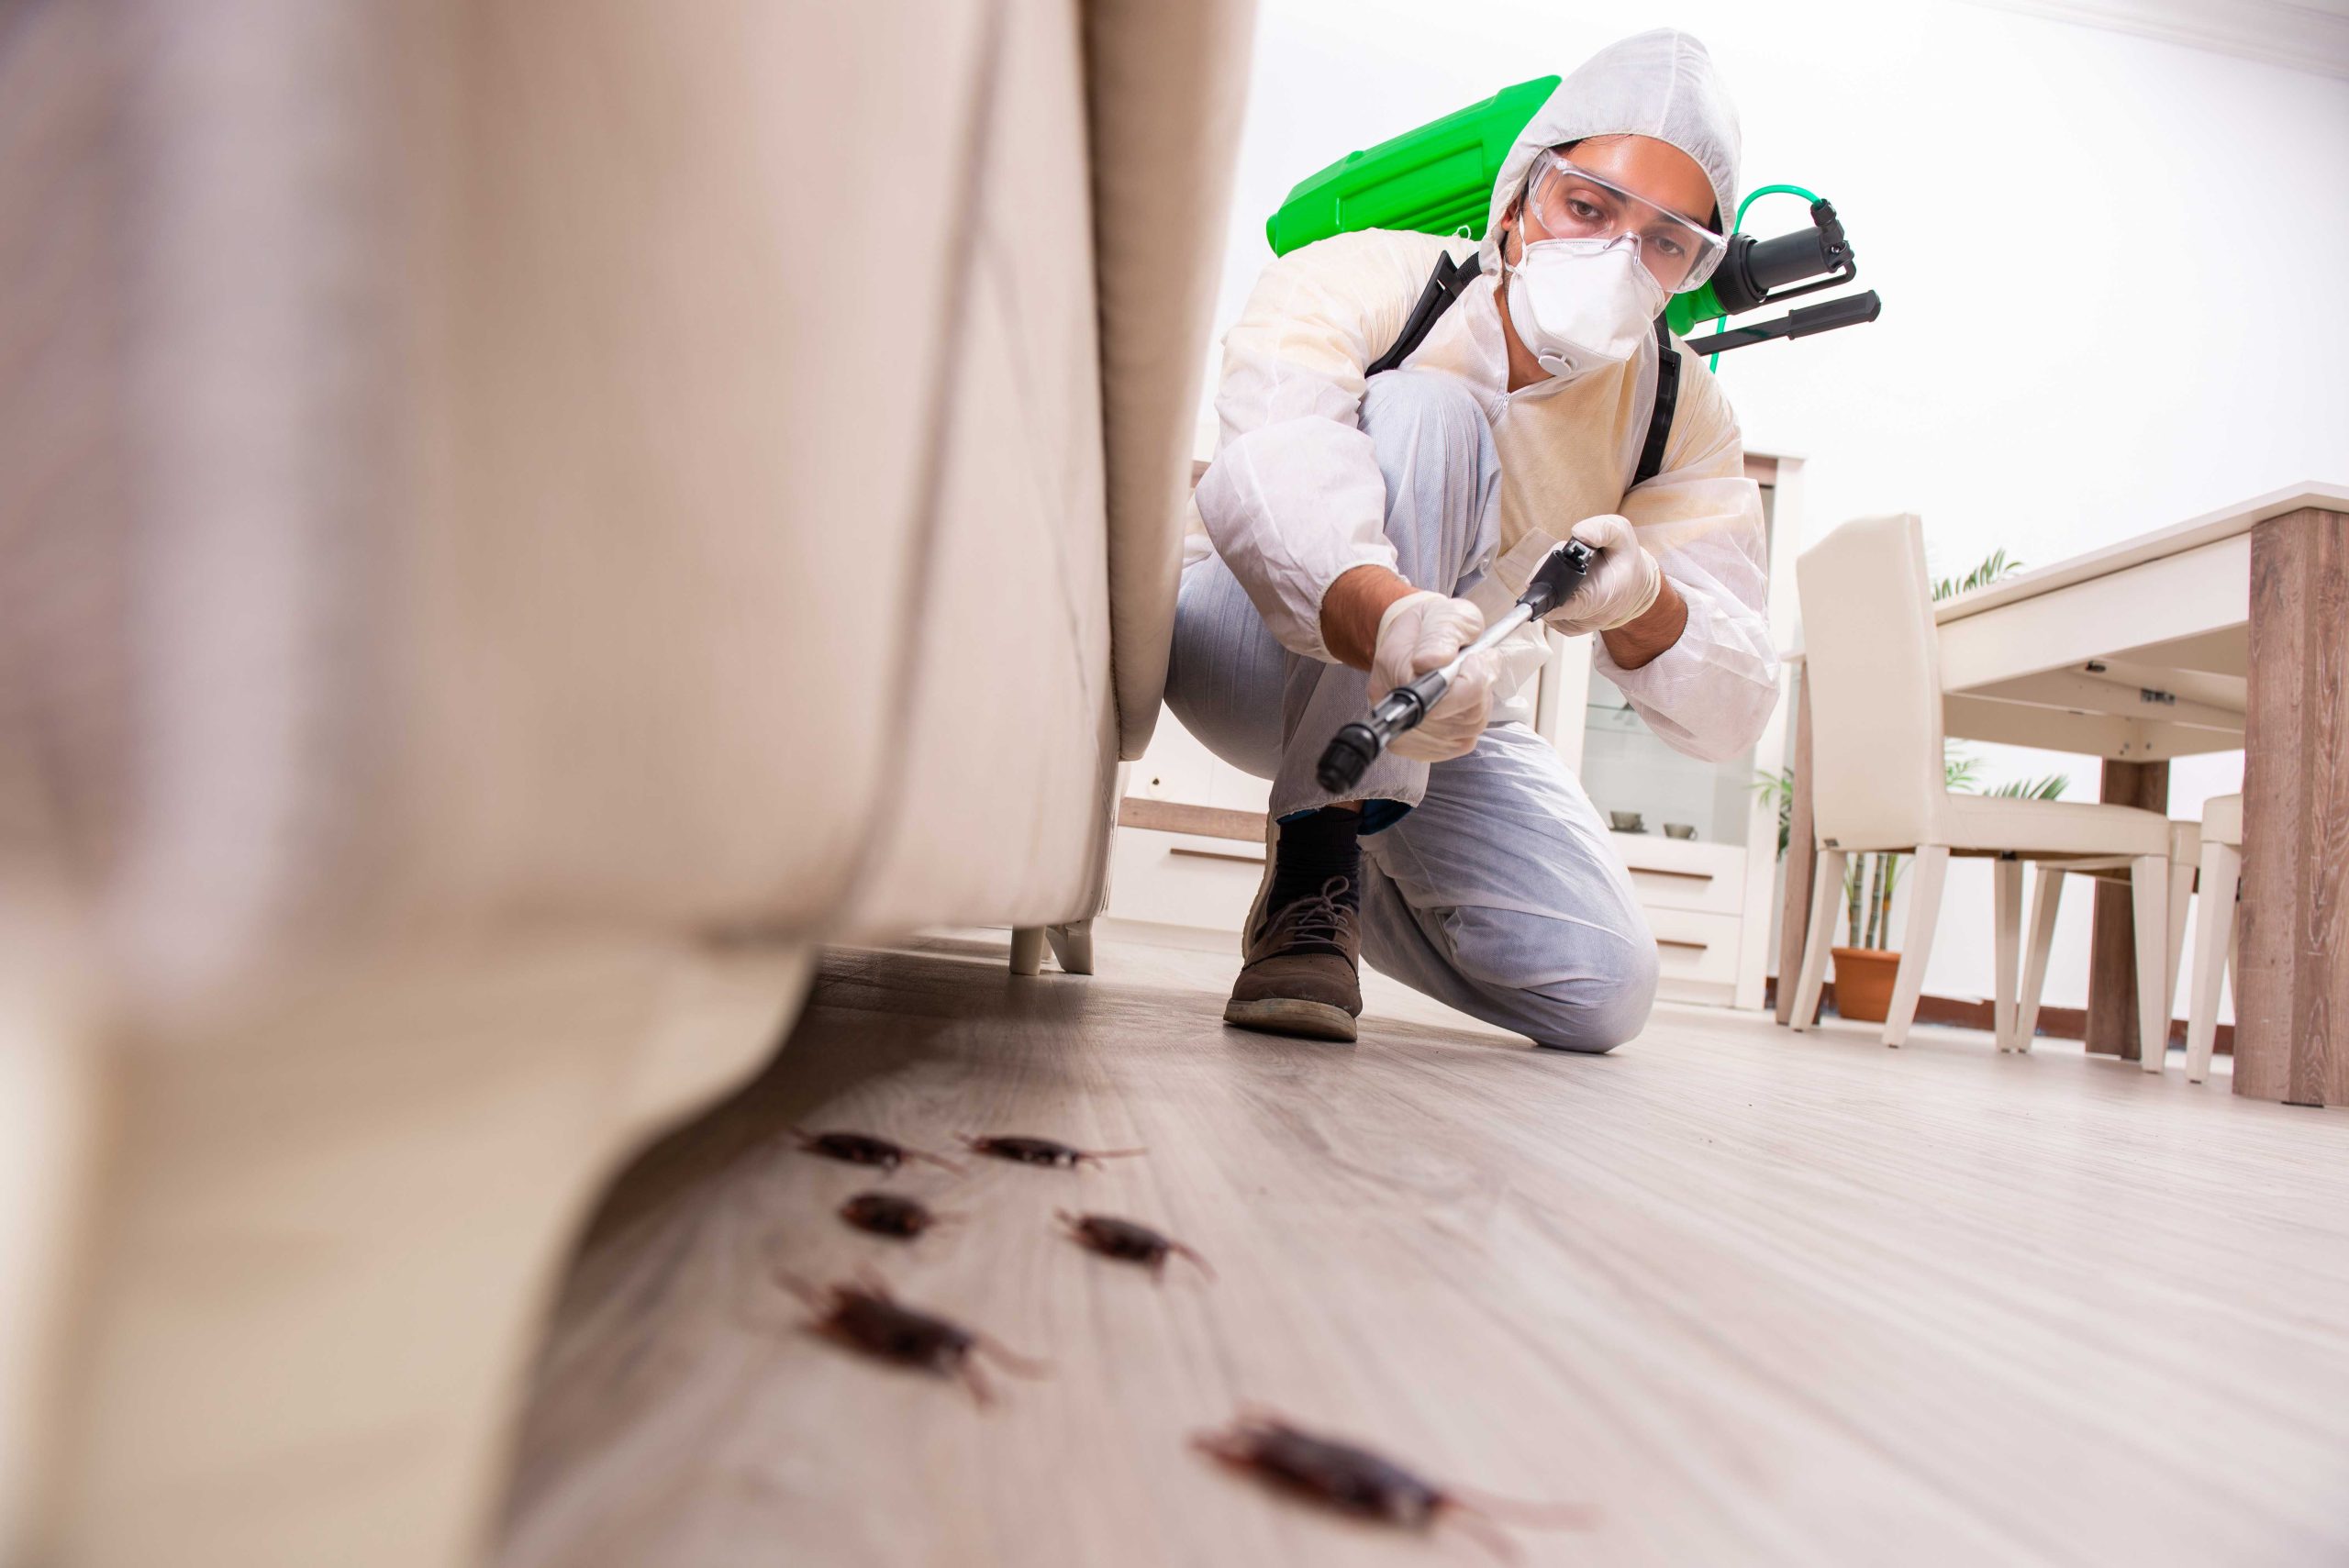 A contractor clearing termite damage in a home in Los Angeles, CA.